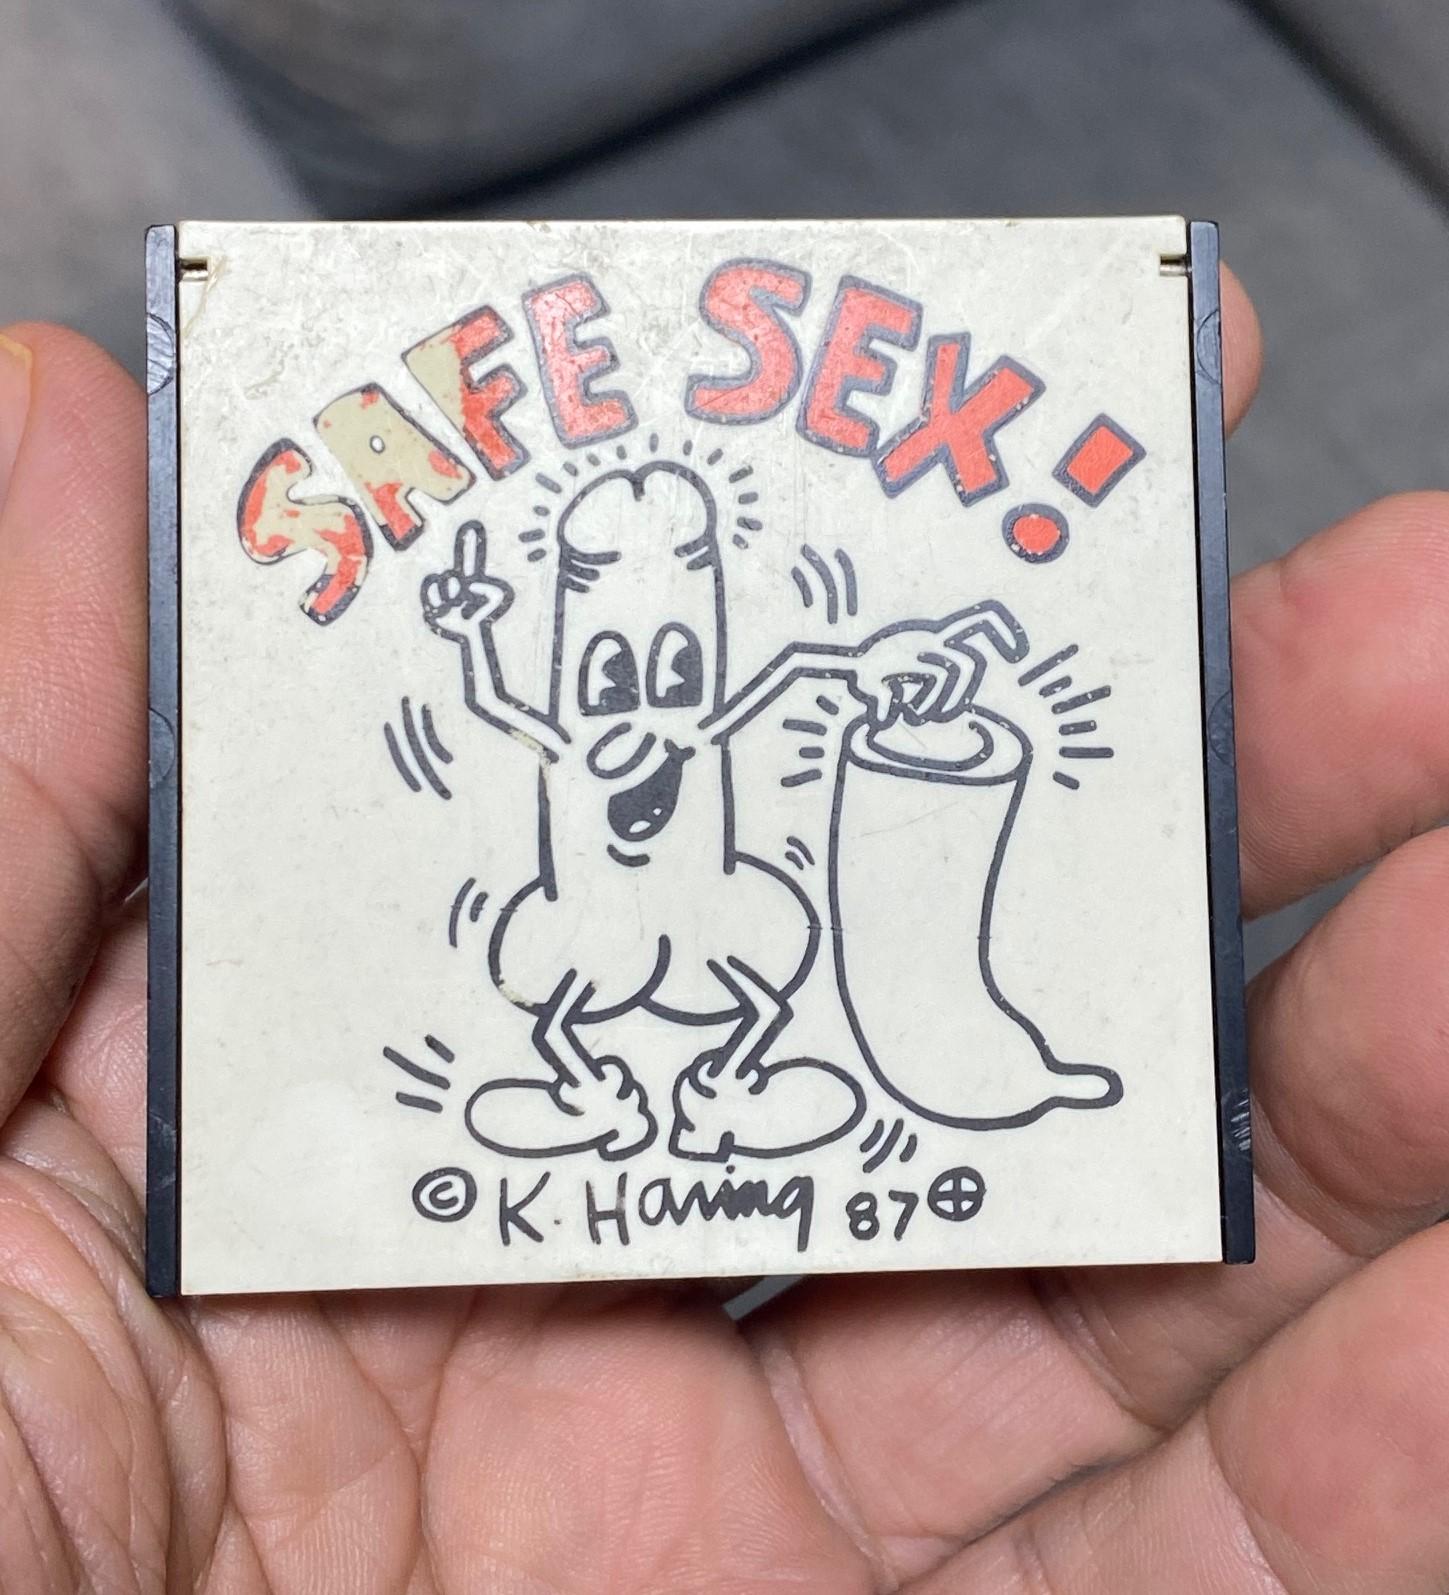 Metal Keith Haring Rare Signed NYC Pop Shop Safe Sex Condom Carrying Clip On Case 1987 For Sale